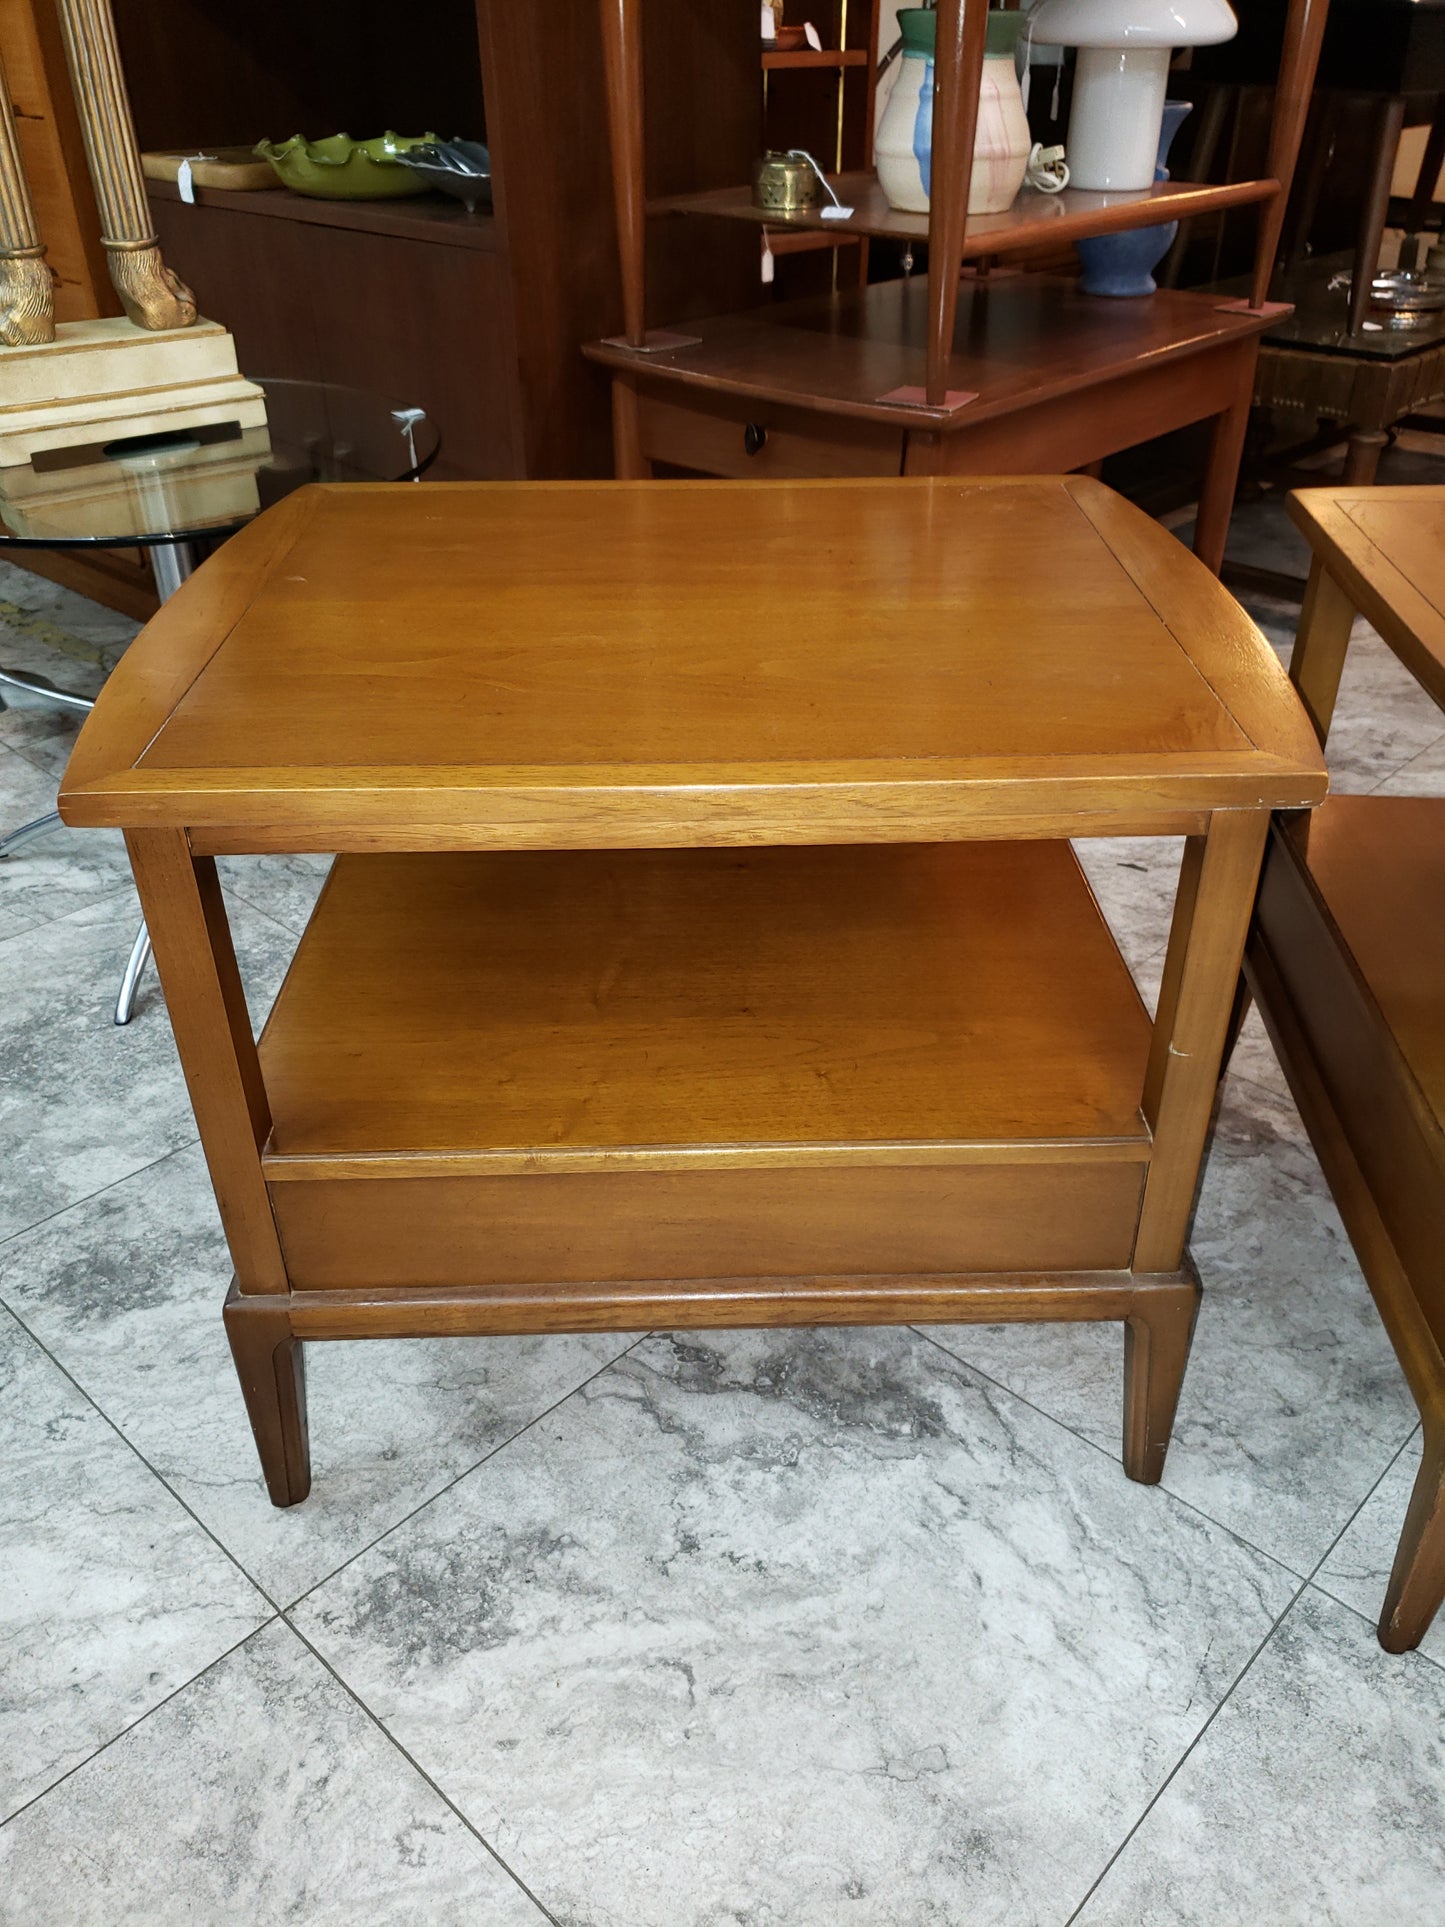 Vintage Coffee Table and 2 Matching End Tables 1960s MCM Mid Century Modern 3pc